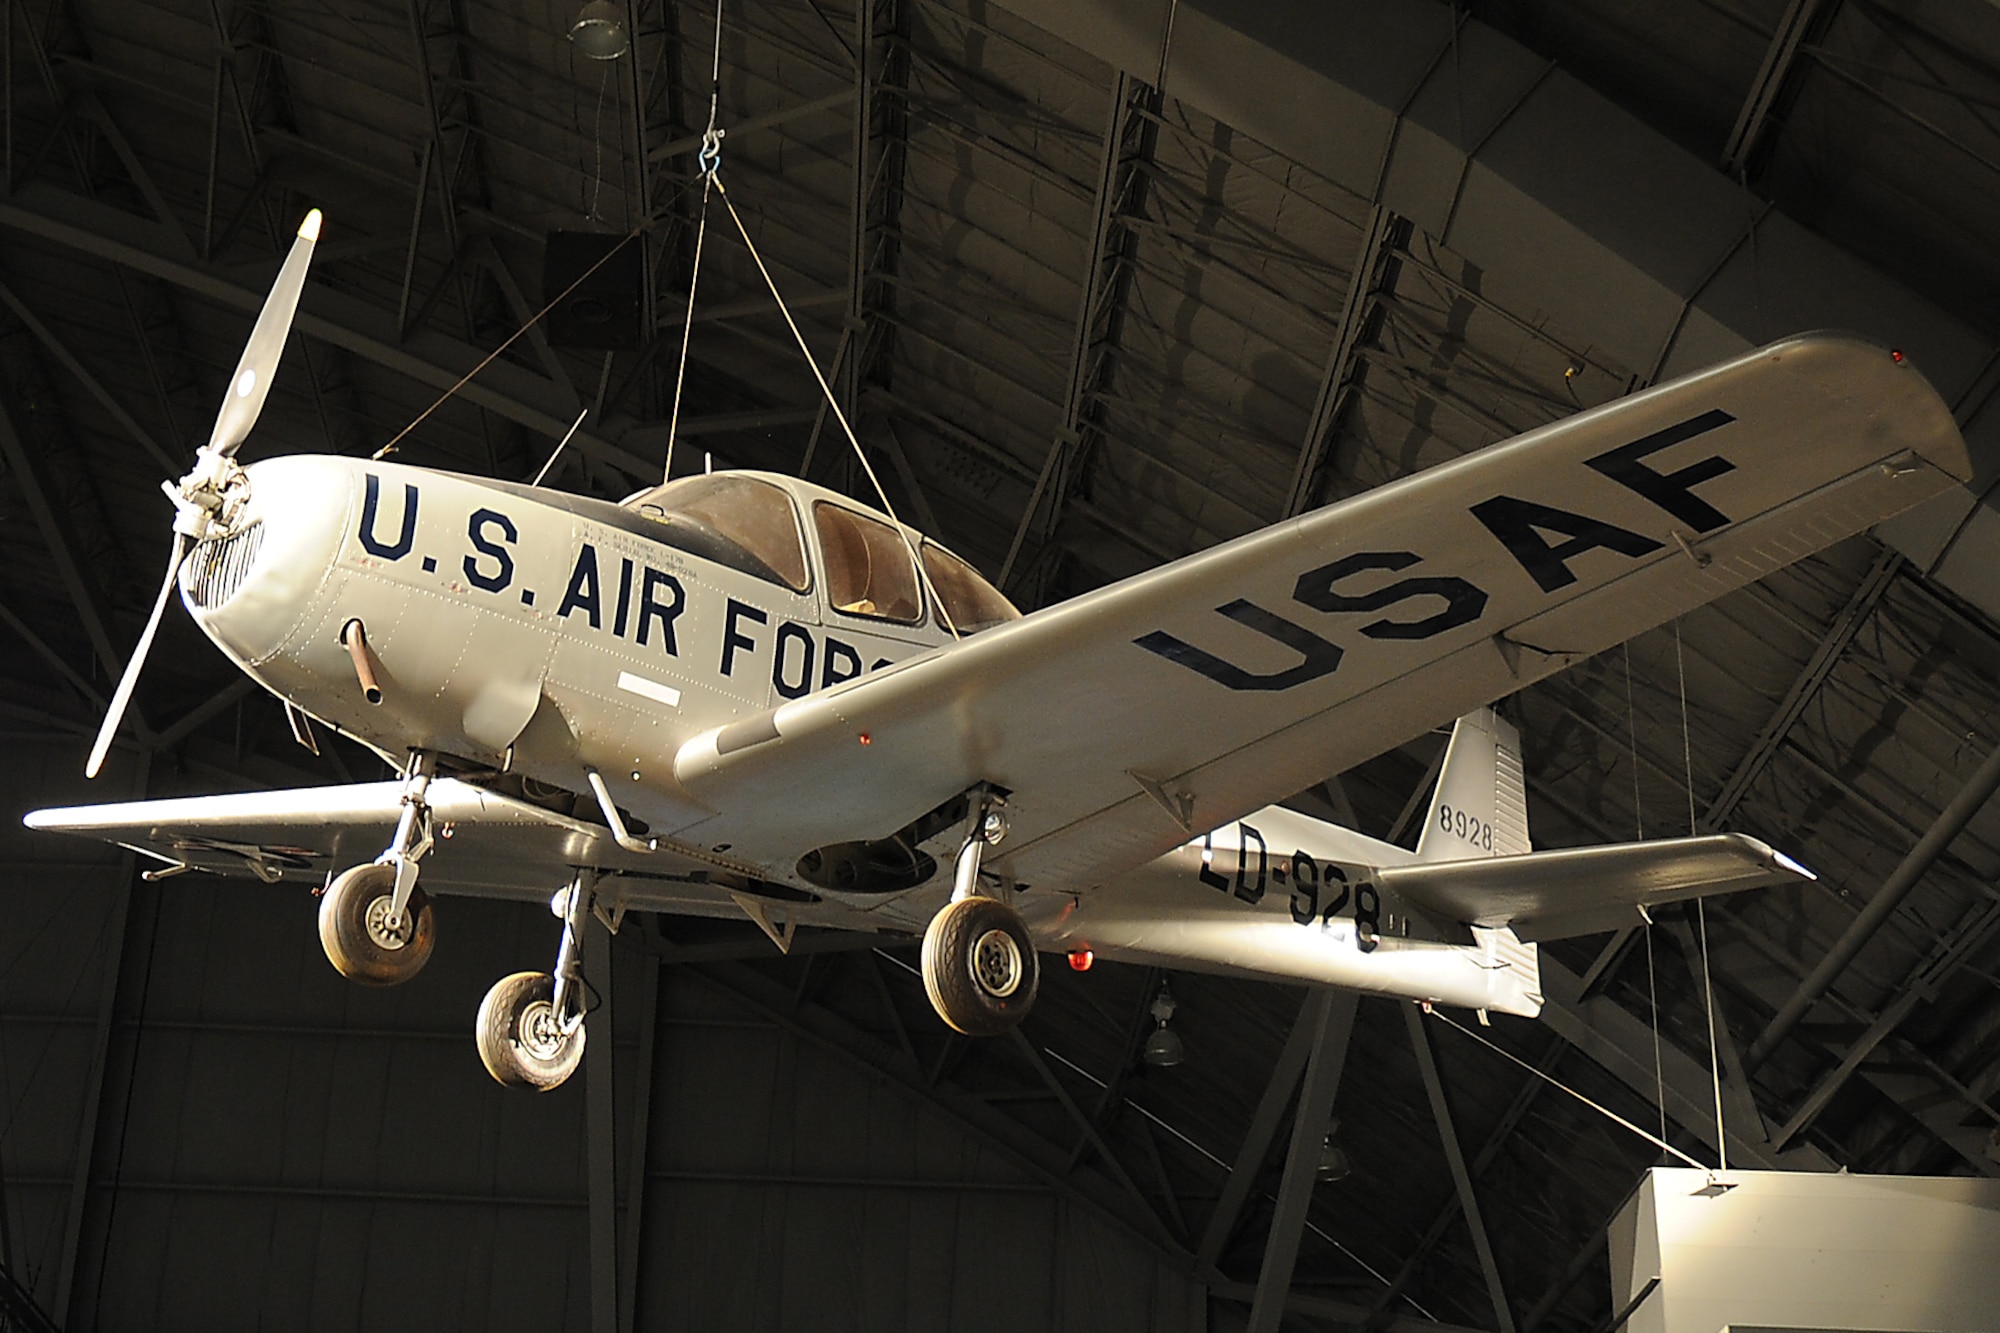 DAYTON, Ohio -- North American L-17A Navion on display in the Korean War Gallery at the National Museum of the United States Air Force. (U.S. Air Force photo)
